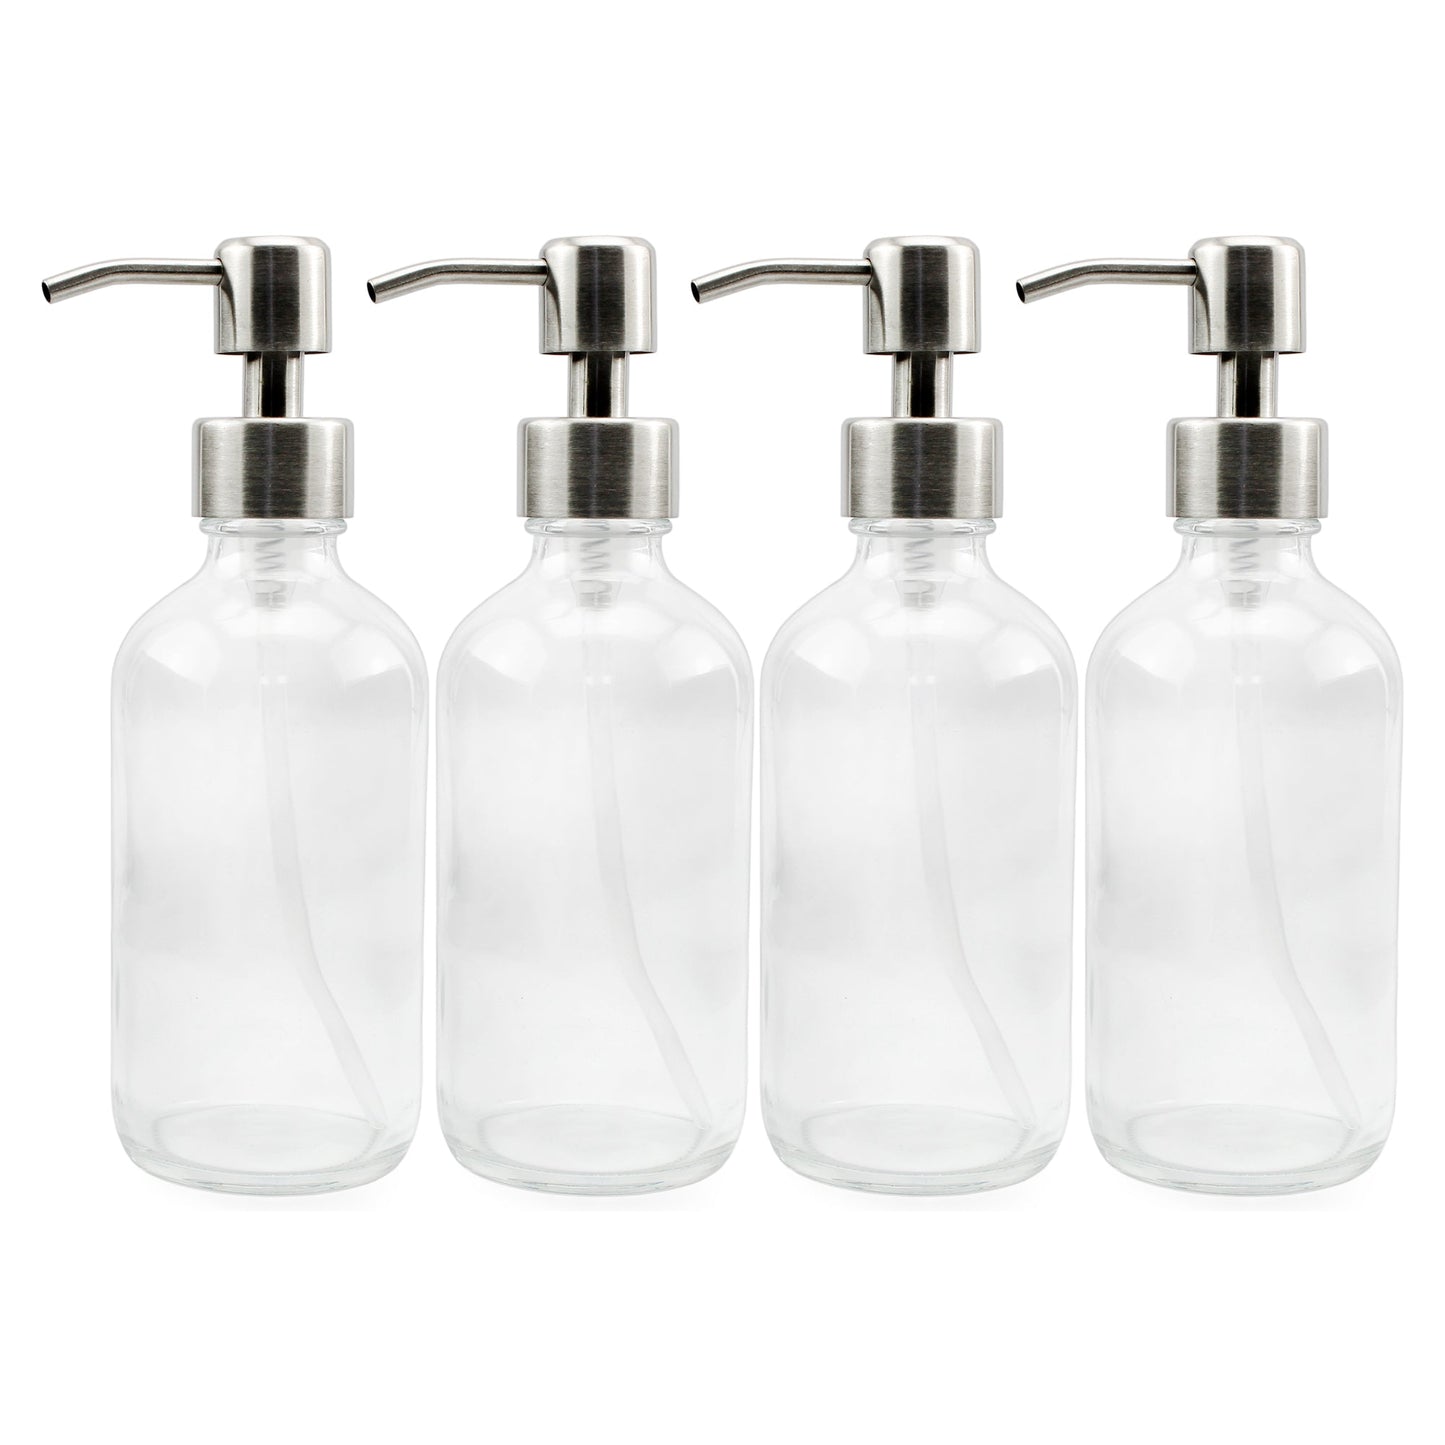 8oz Clear Glass Bottles w/ Stainless Steel Lotion Pumps (4-Pack) - sh899cb04pk